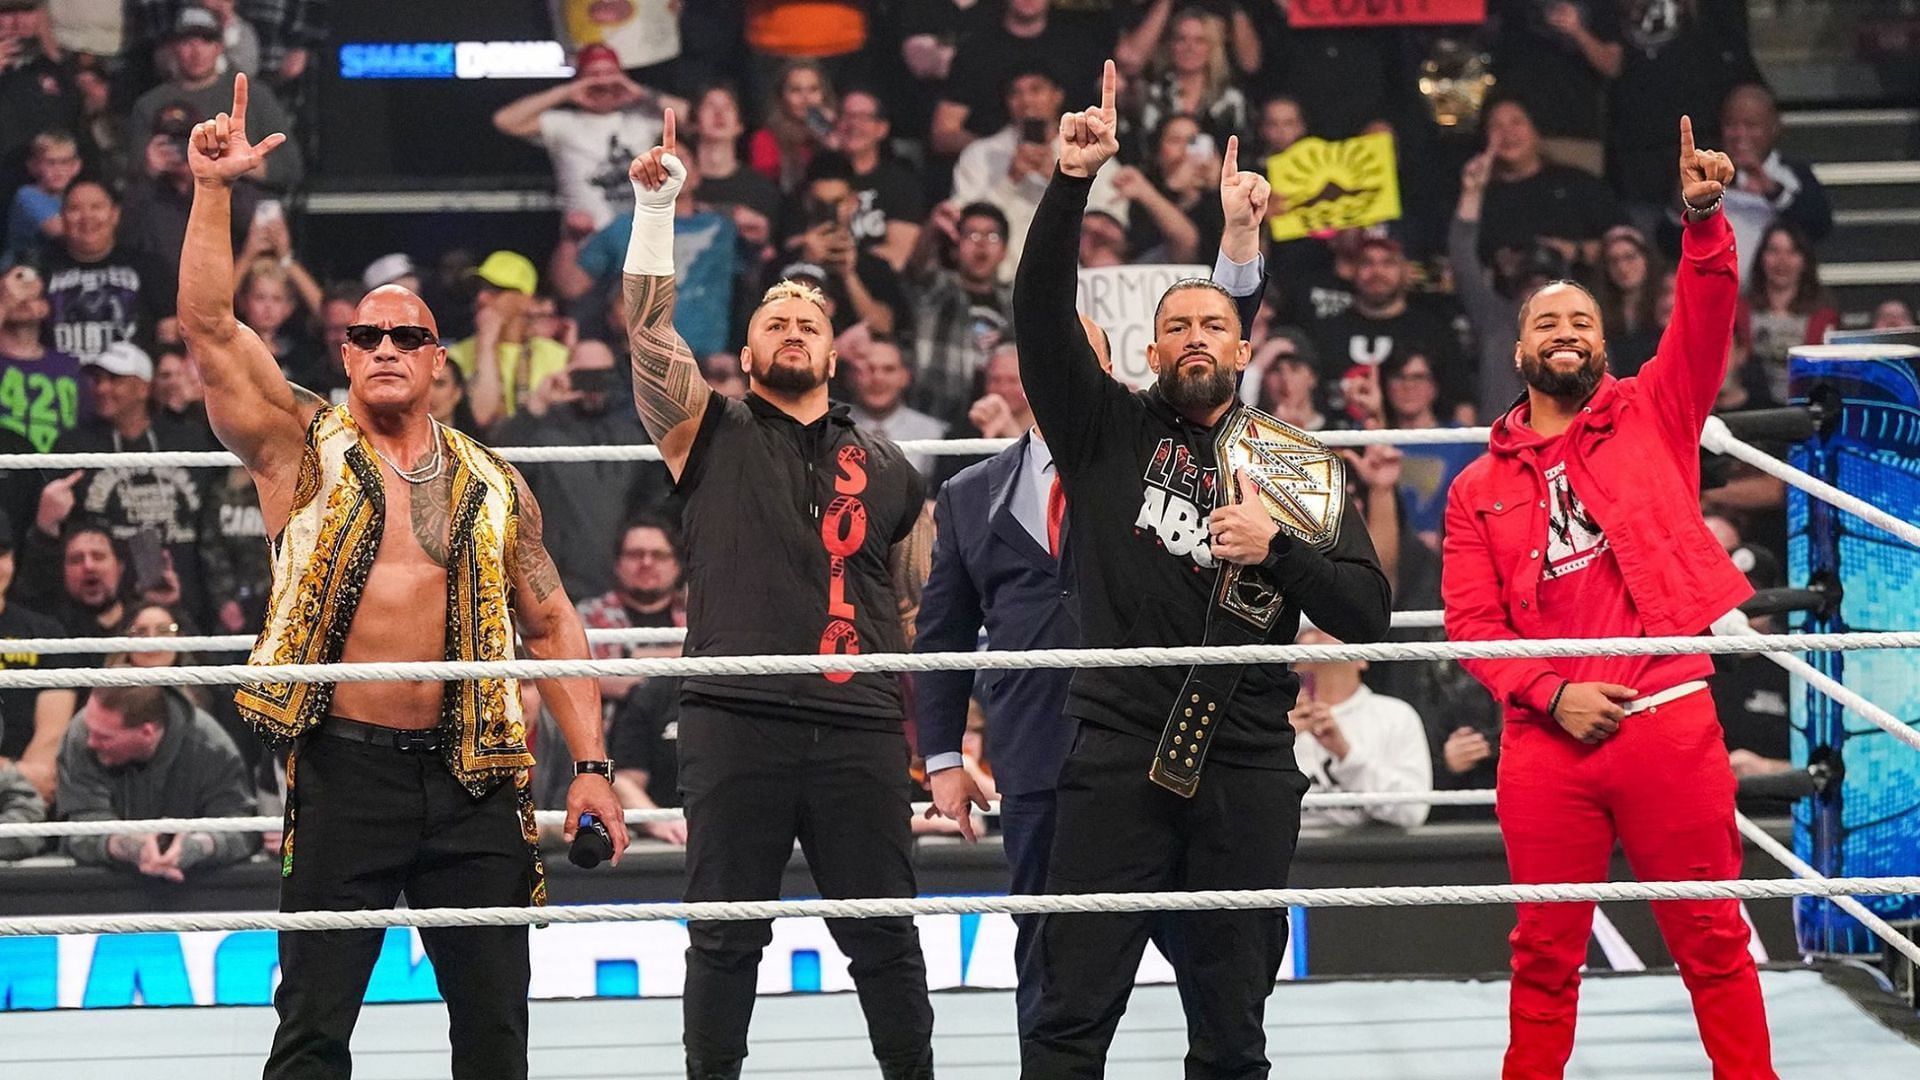 The Rock has officially joined The Bloodline in WWE.